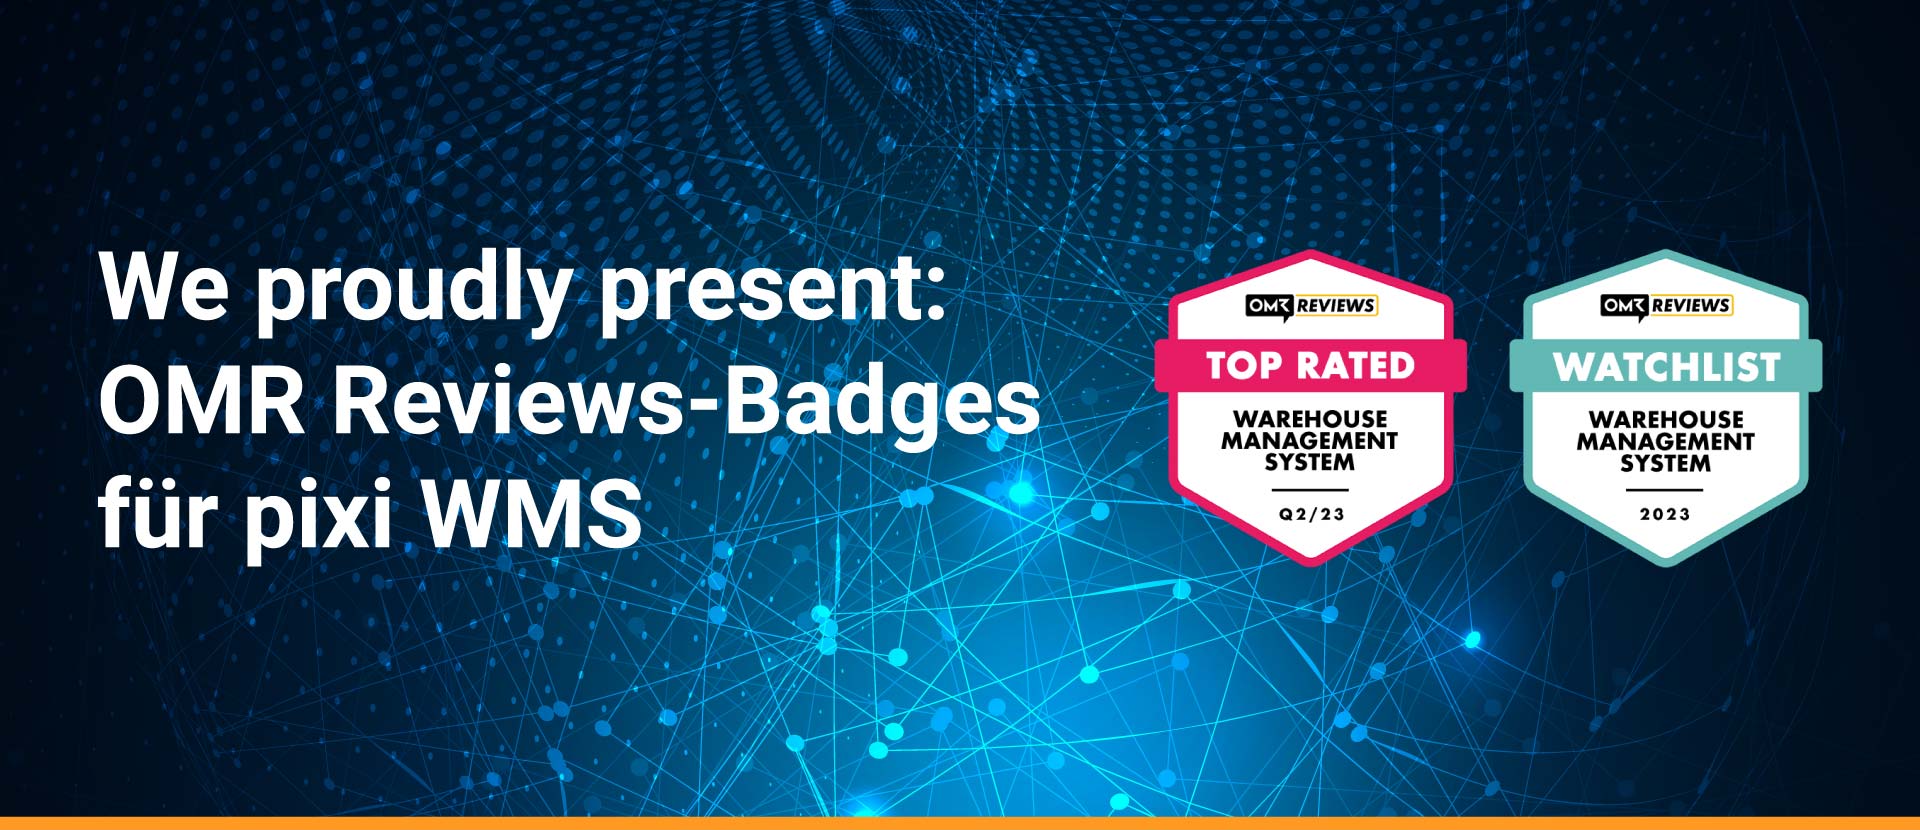 OMR Reviews Top Rated & Watchlist Badge